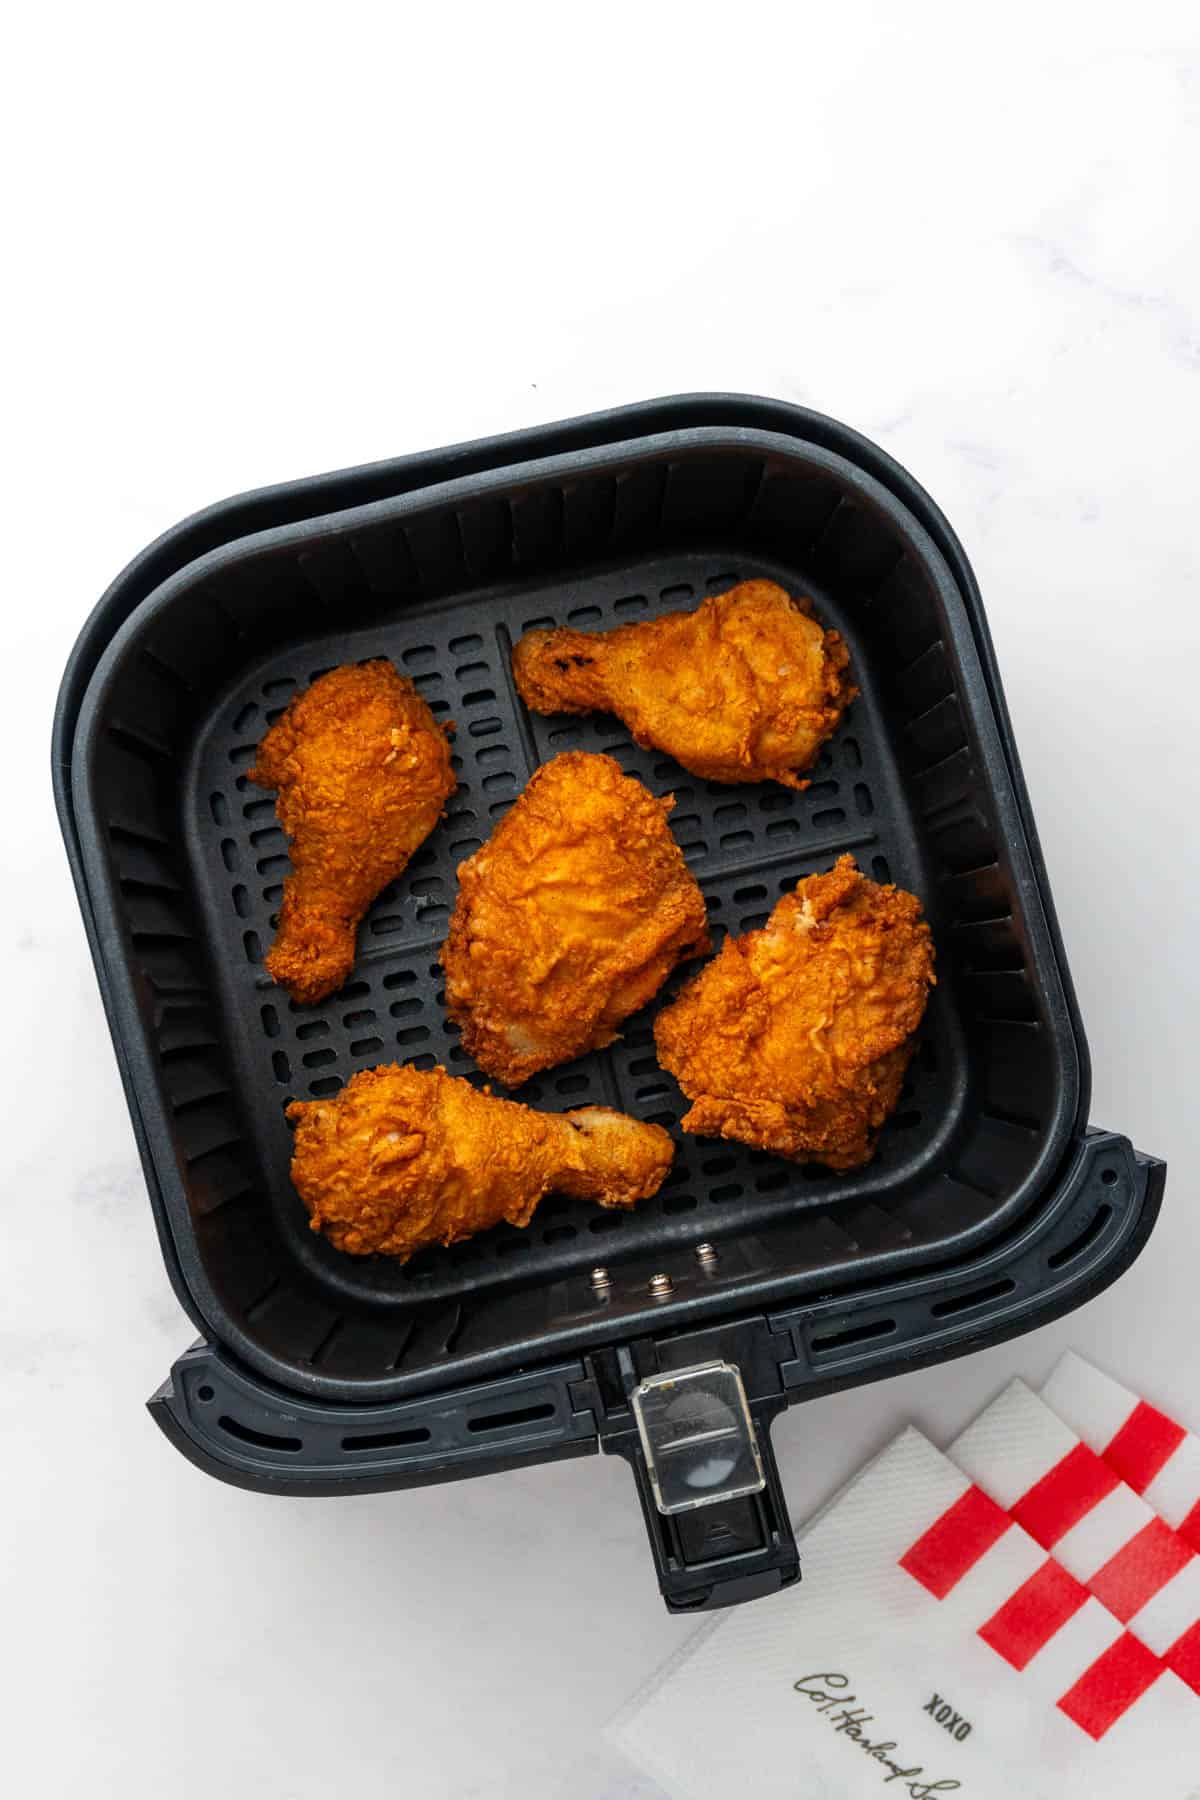 Five pieces of fried chicken laid out in the air fryer basket with some napkins for decoration. 